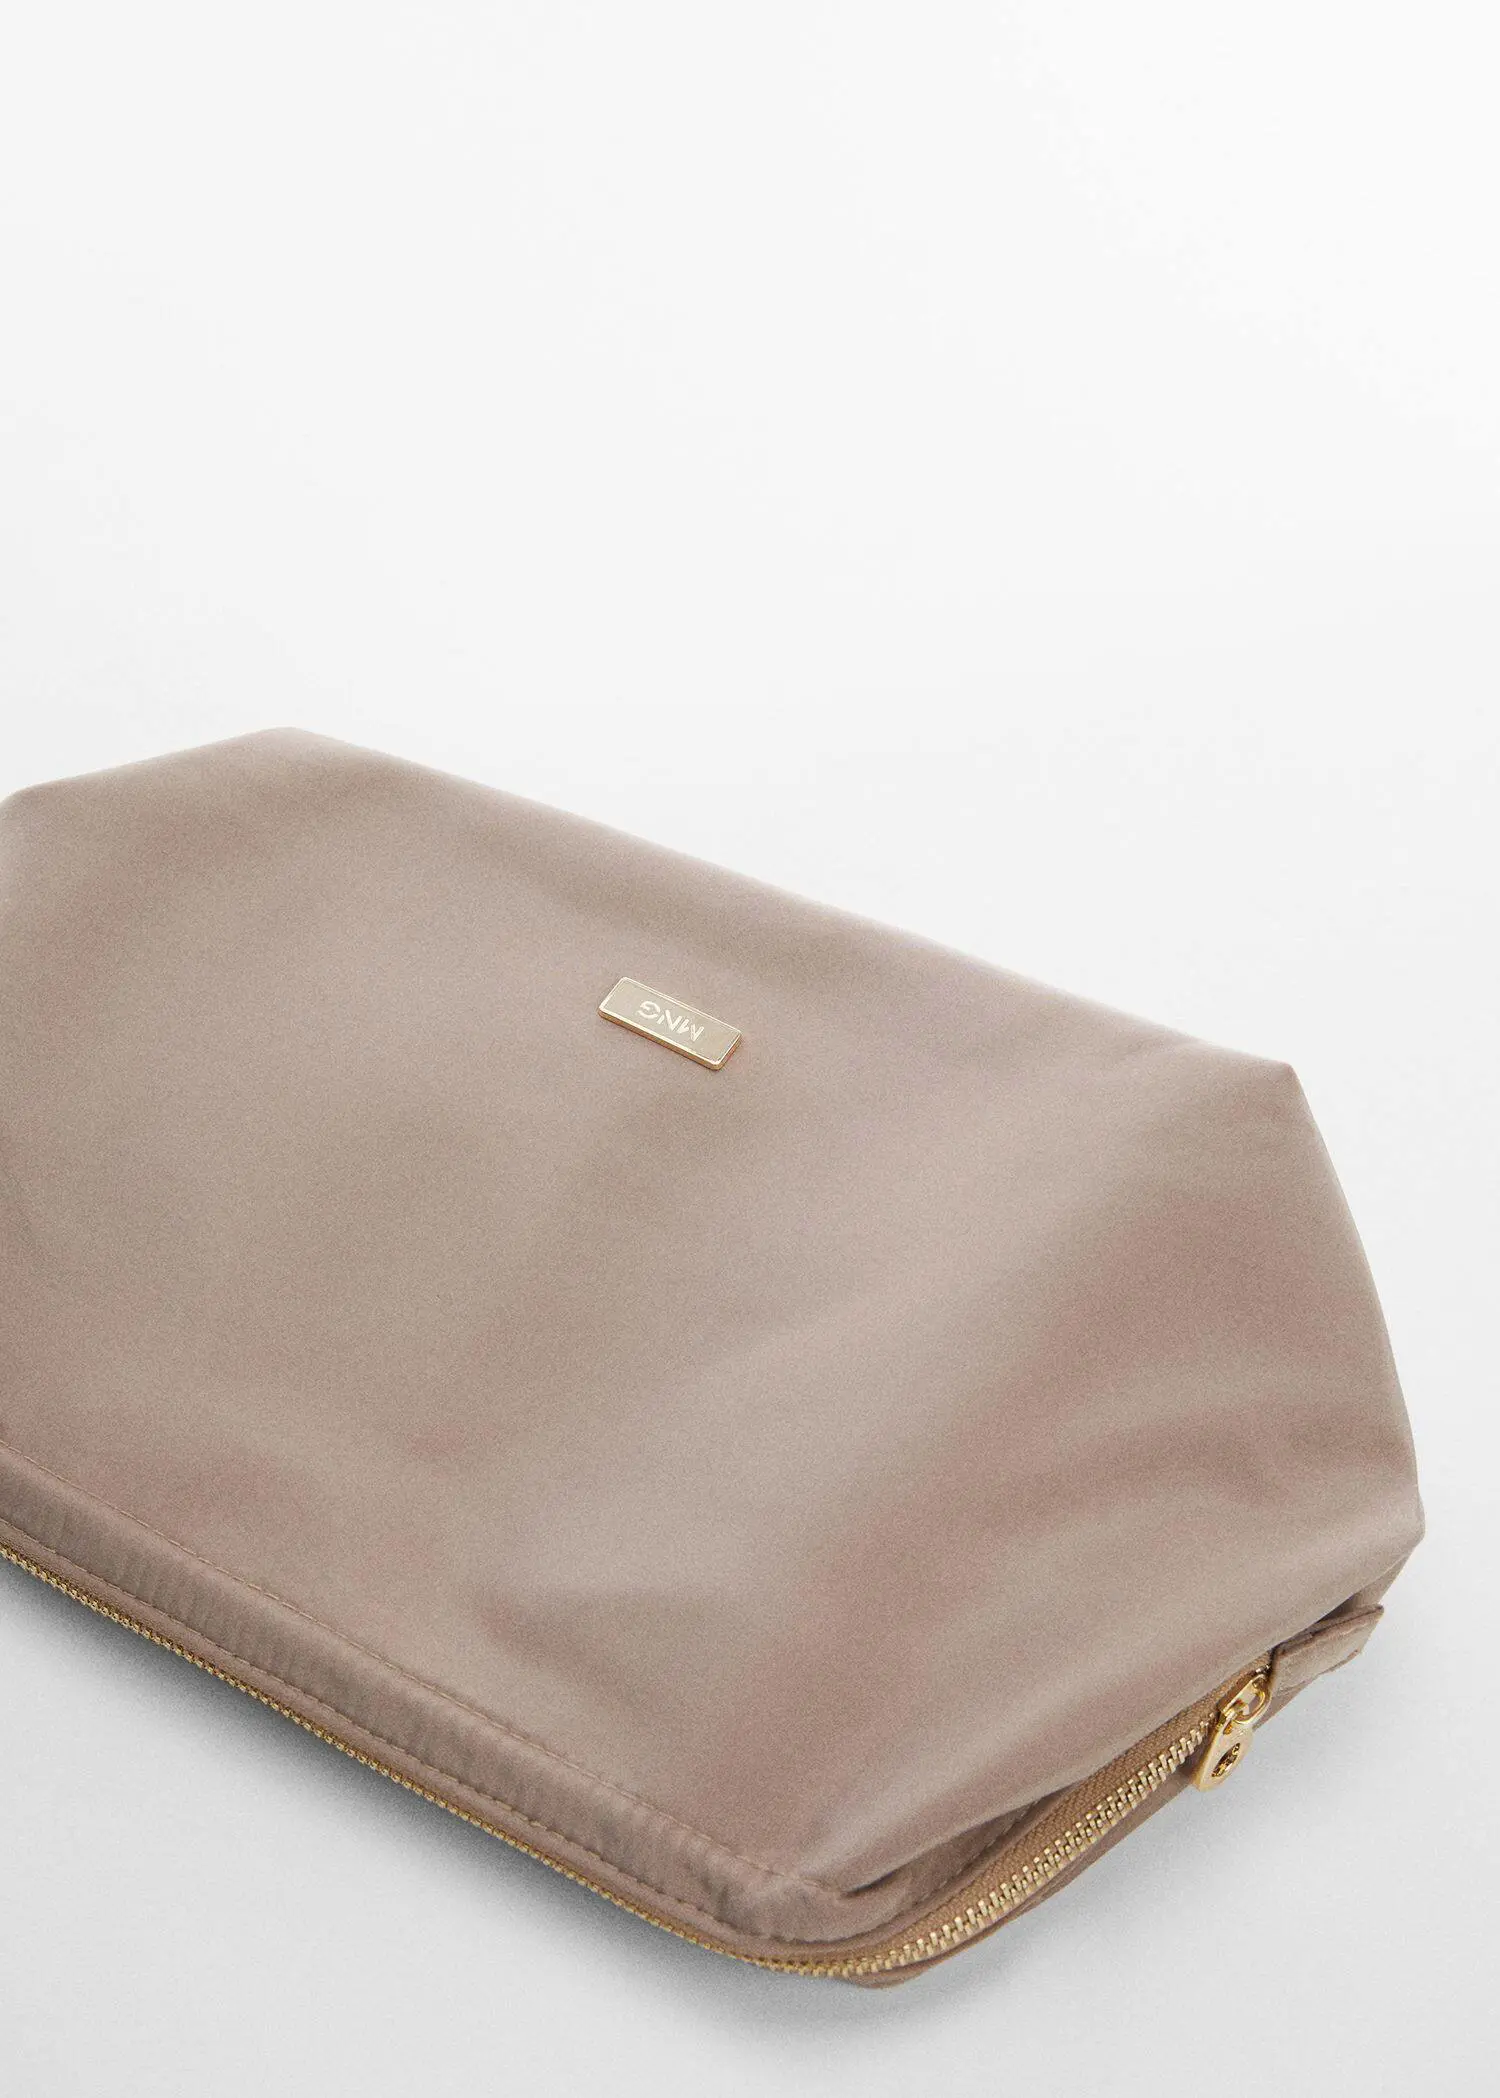 Mango Zipped nylon cosmetics bag. a close-up of a beige cosmetic bag on a table. 